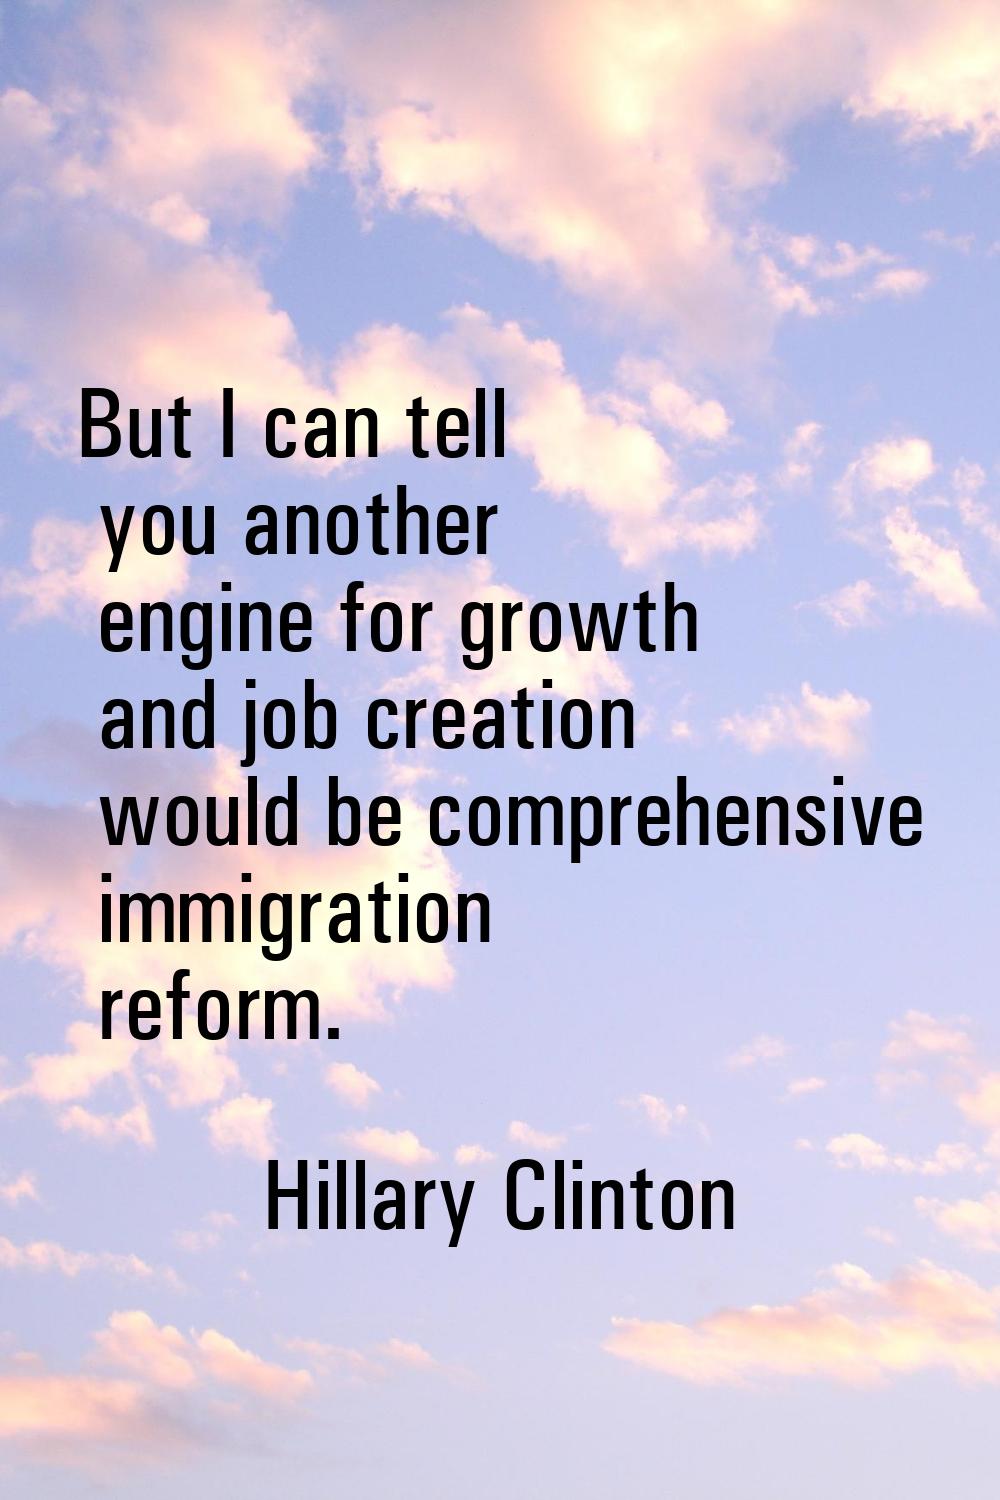 But I can tell you another engine for growth and job creation would be comprehensive immigration re